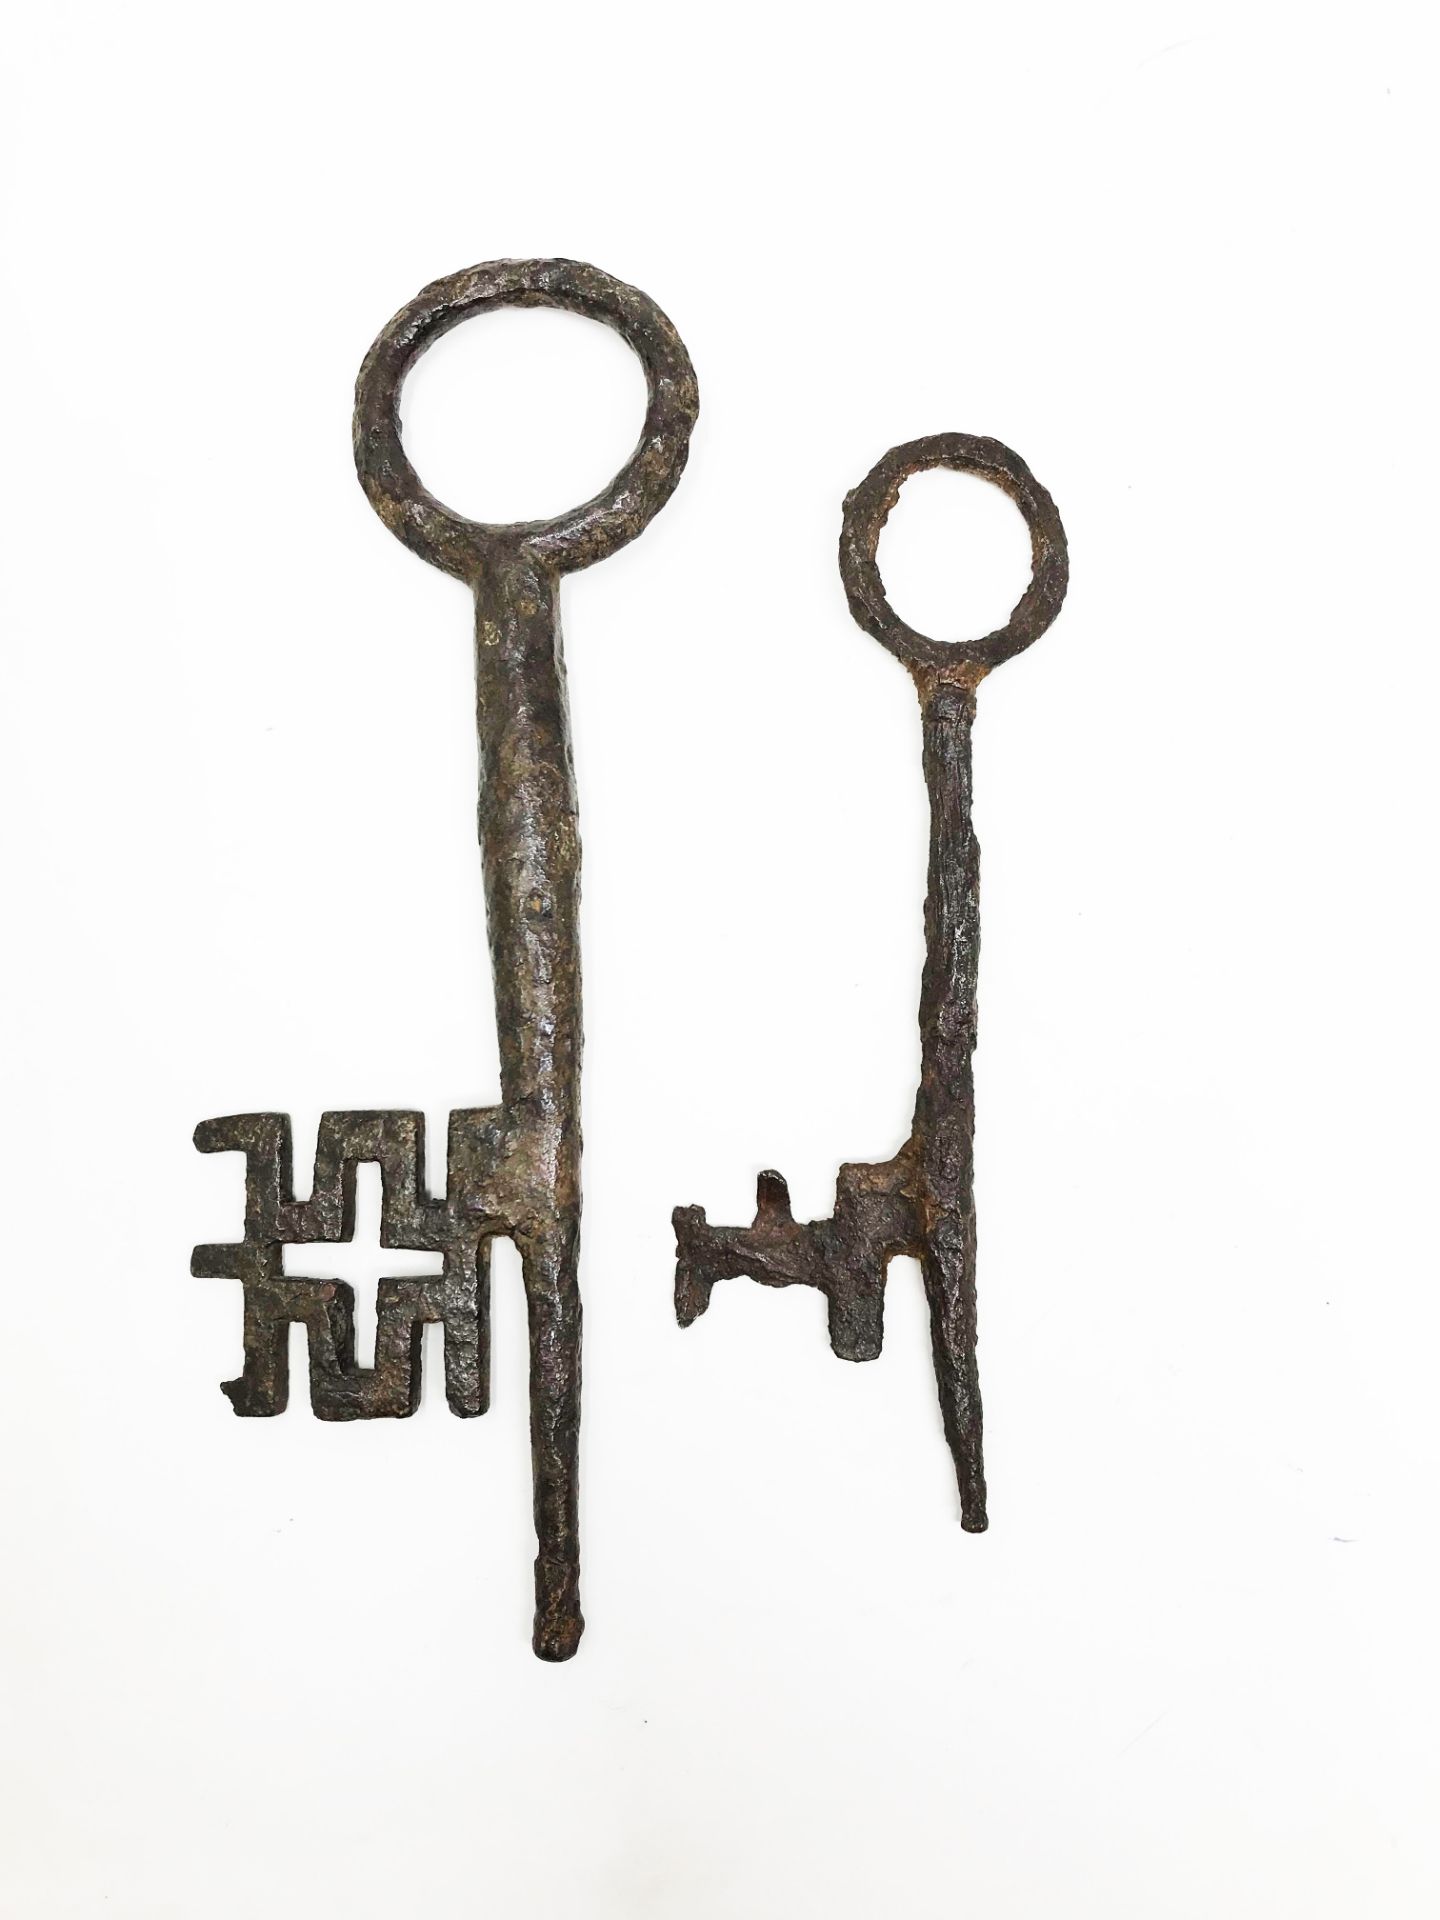 Two gothic keys21, 8 - 17, 2 cm. Part of the chapter "From the Time of the Cathedrals".